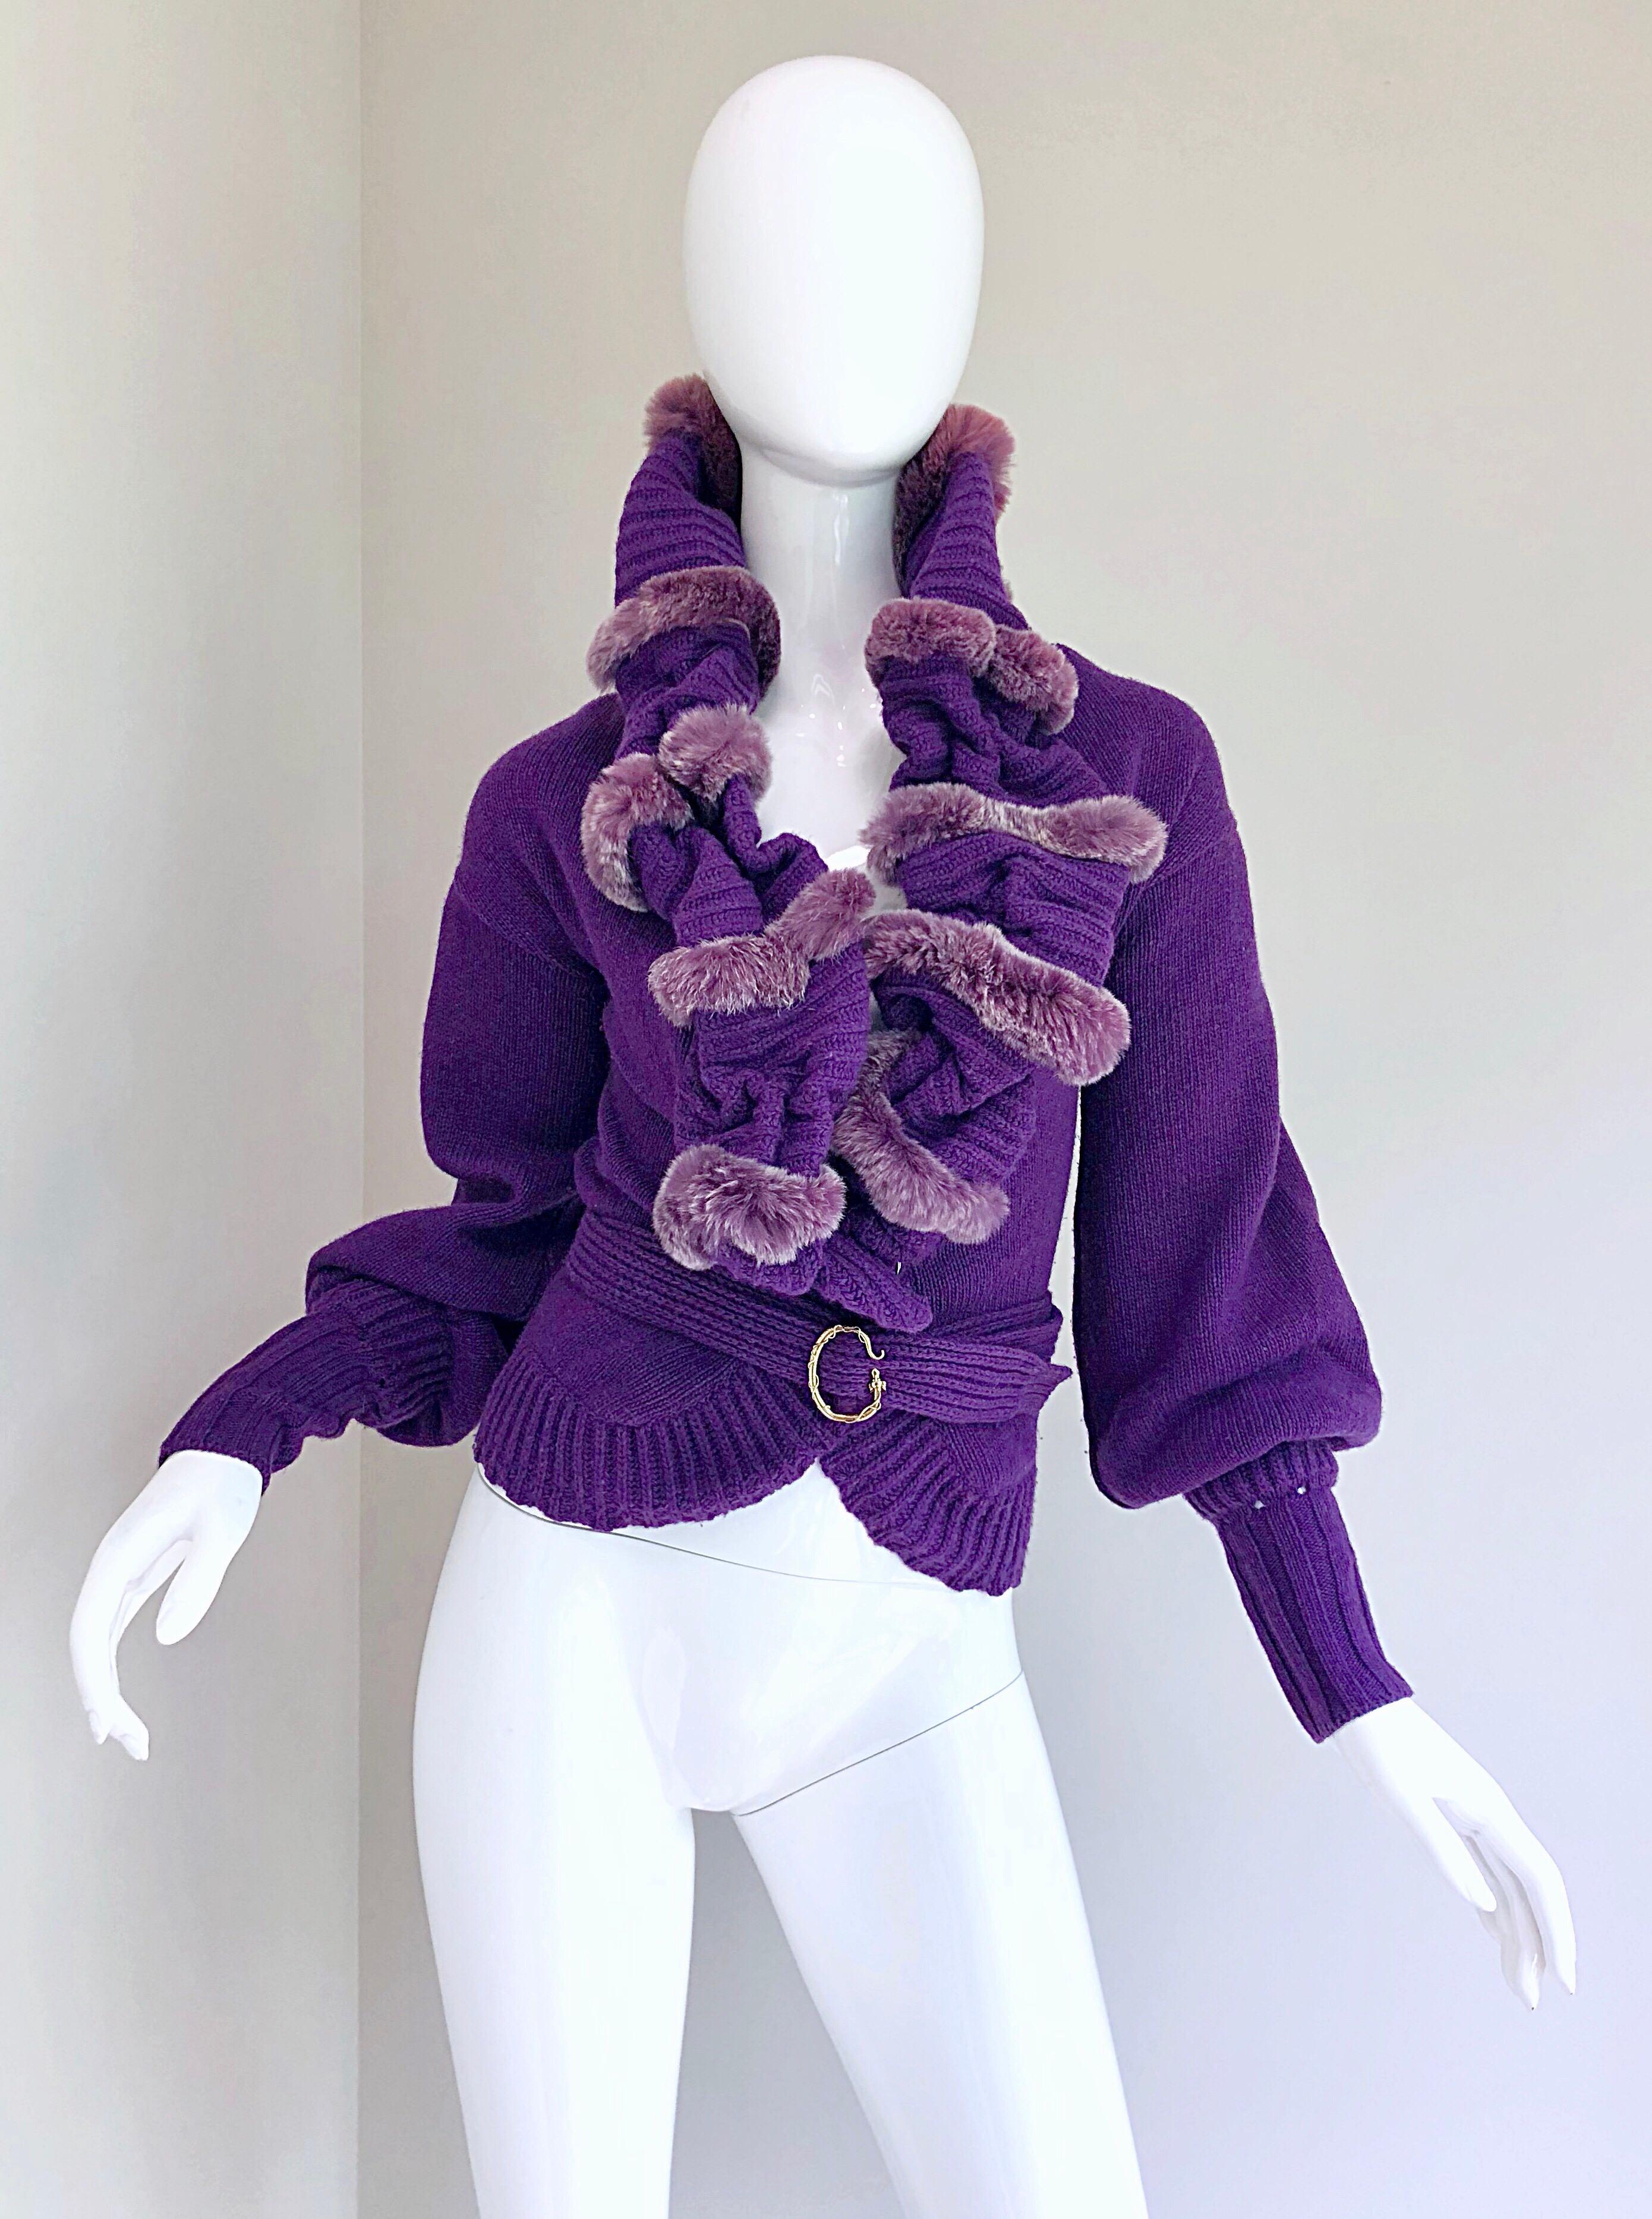 Chic early 2000s ROBERTO CAVALLI regal purple luxurious fur and soft virgin wool belted cardigan sweater! Avant Garde style with luxurious fur trim. Detachable matching belt features signature Cavalli serpent buckle. Hidden snap at front center